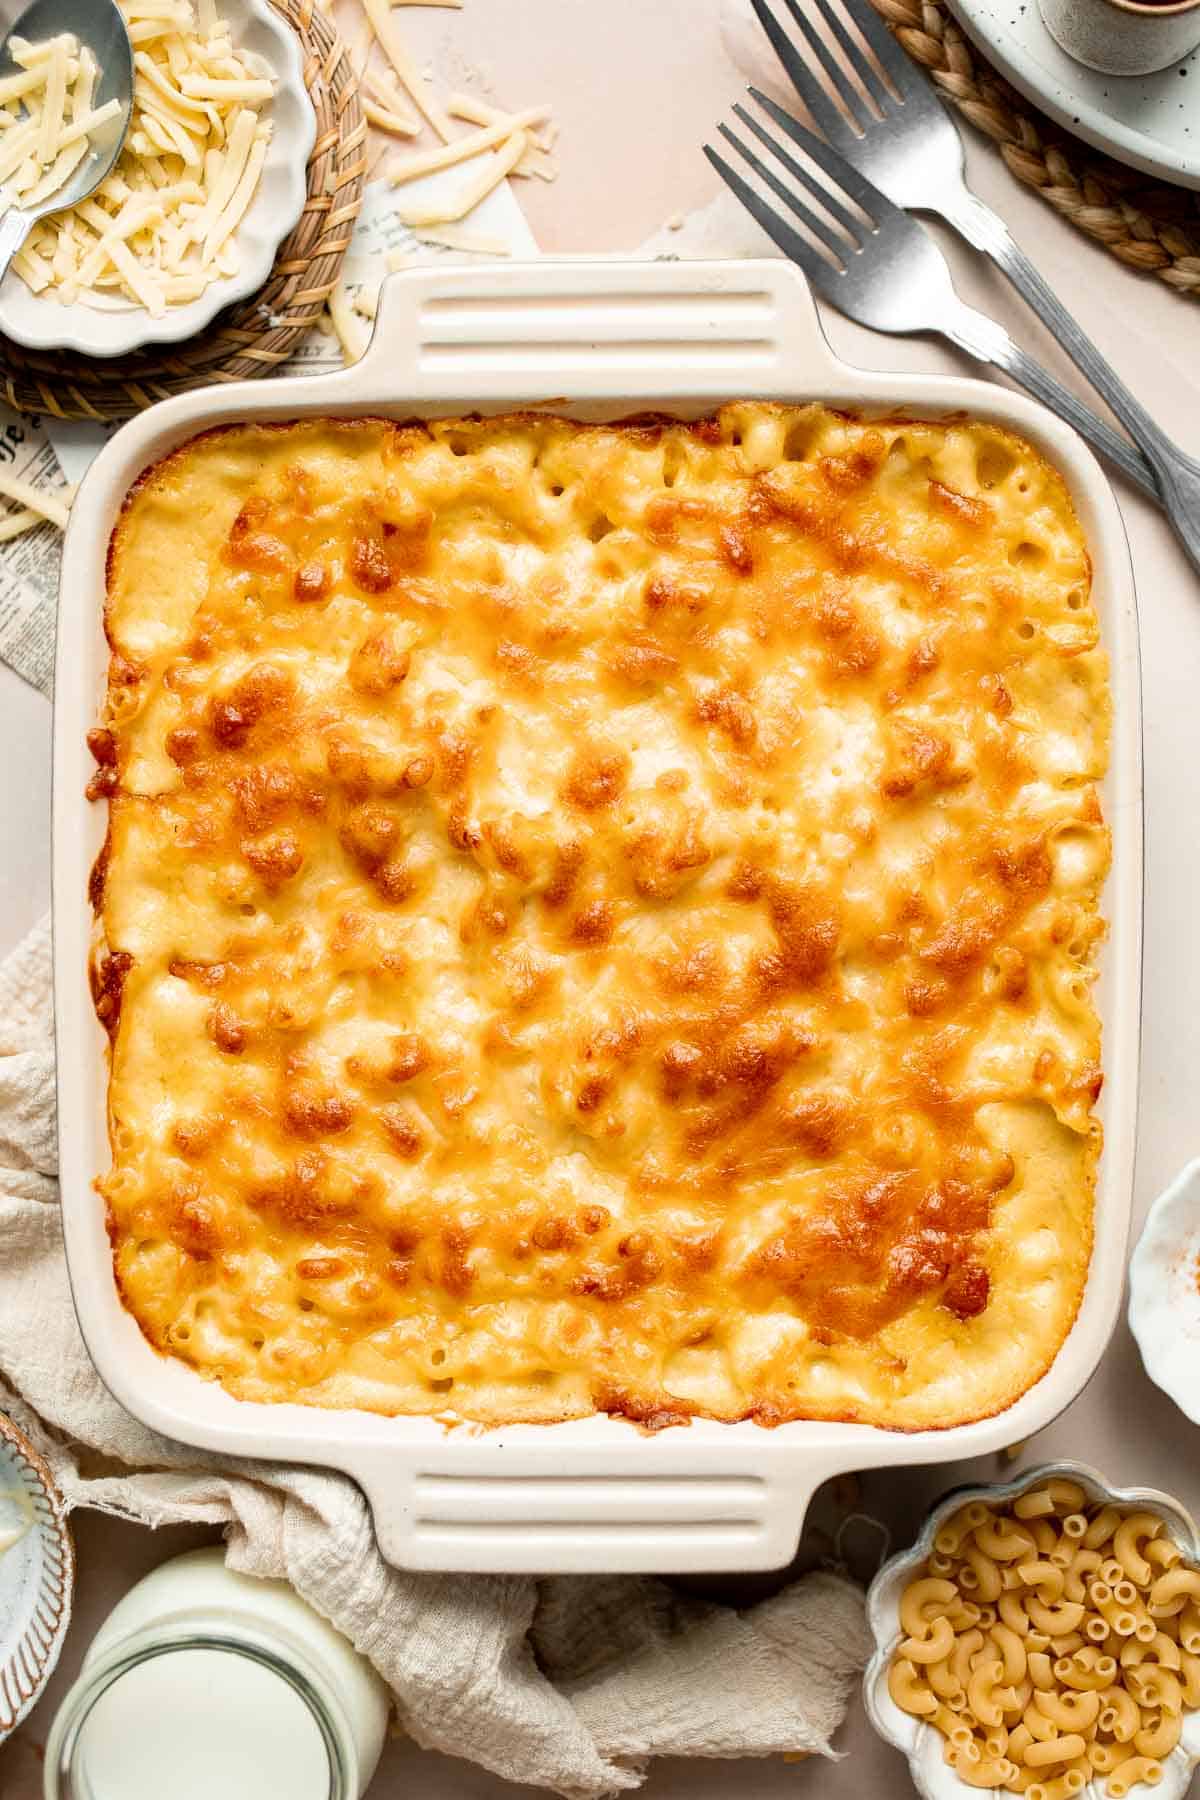 This Spicy Mac and Cheese recipe is a spicy version of a beloved classic that takes this cheesy pasta to the next level with added spices for a kick. | aheadofthyme.com